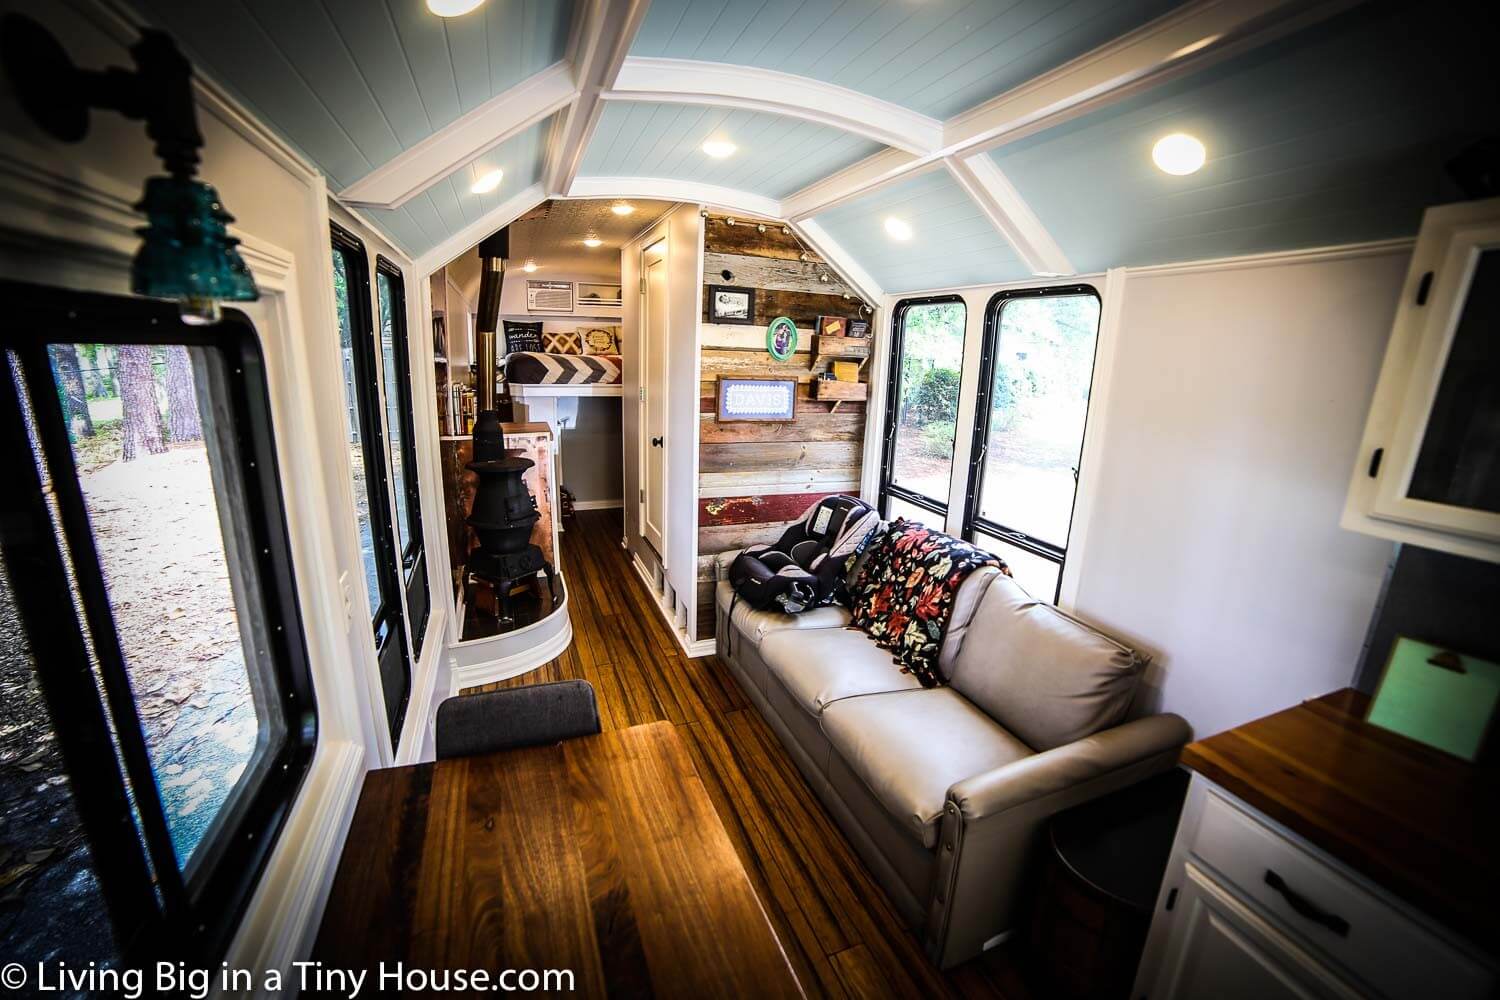 Living Big in a Tiny House - School Bus Converted To Incredible Off